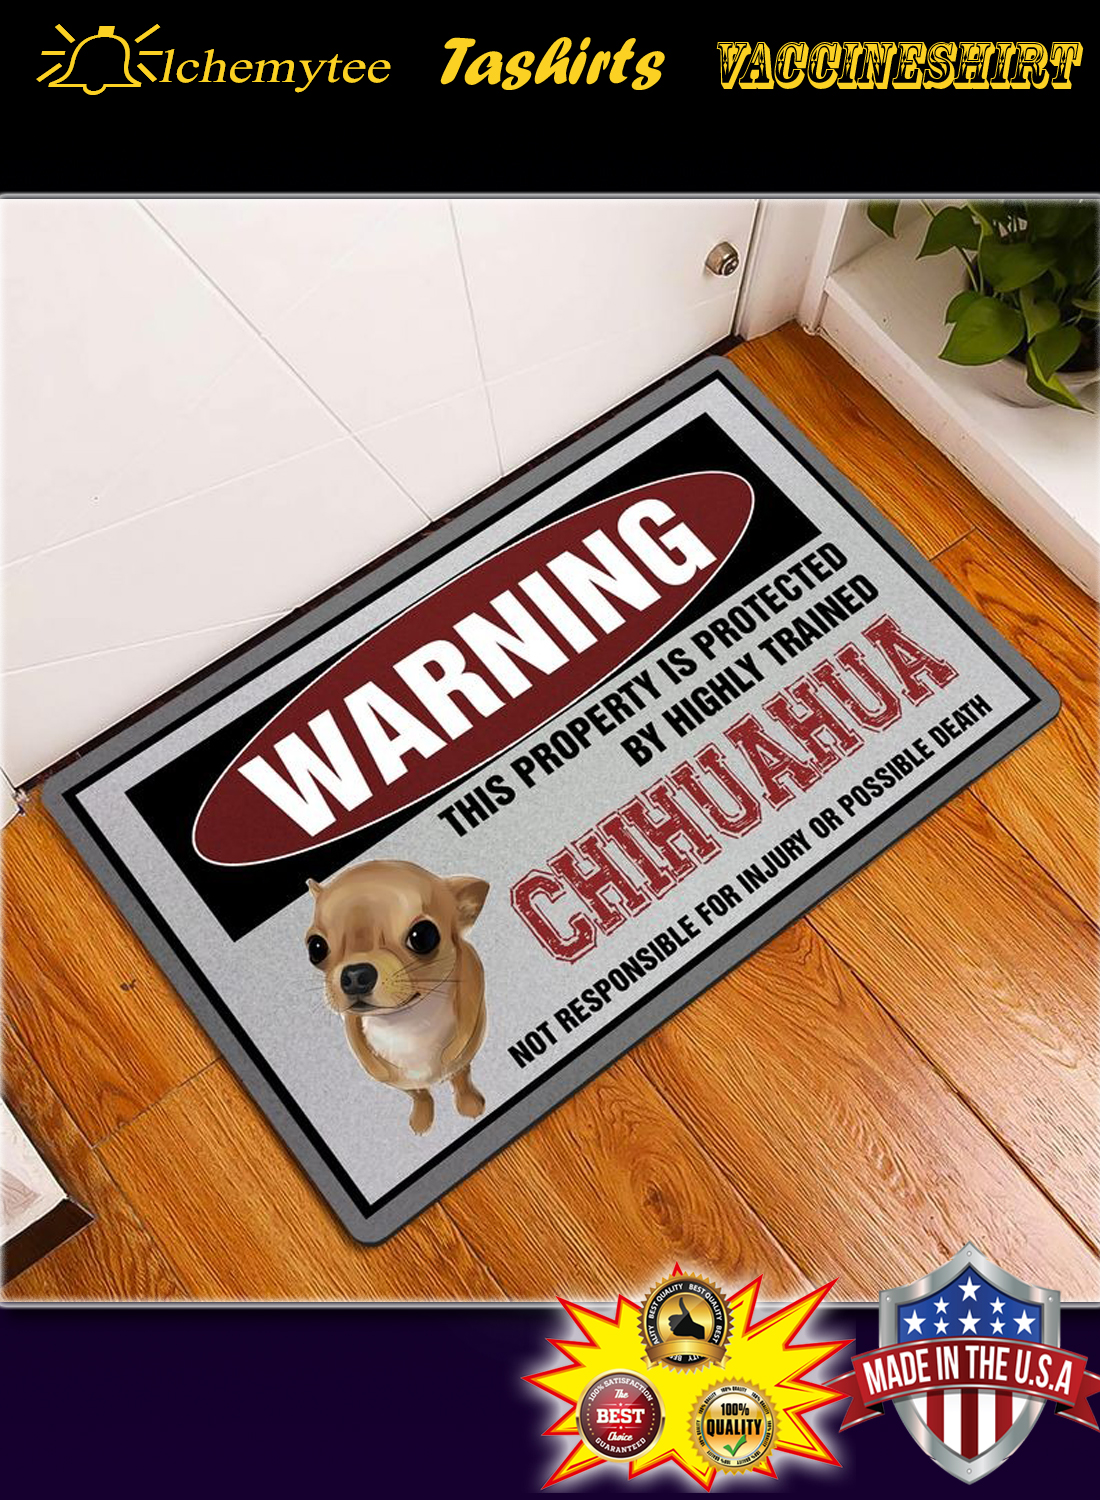 Warning this property is proctected by highly trained chihuahua doormat